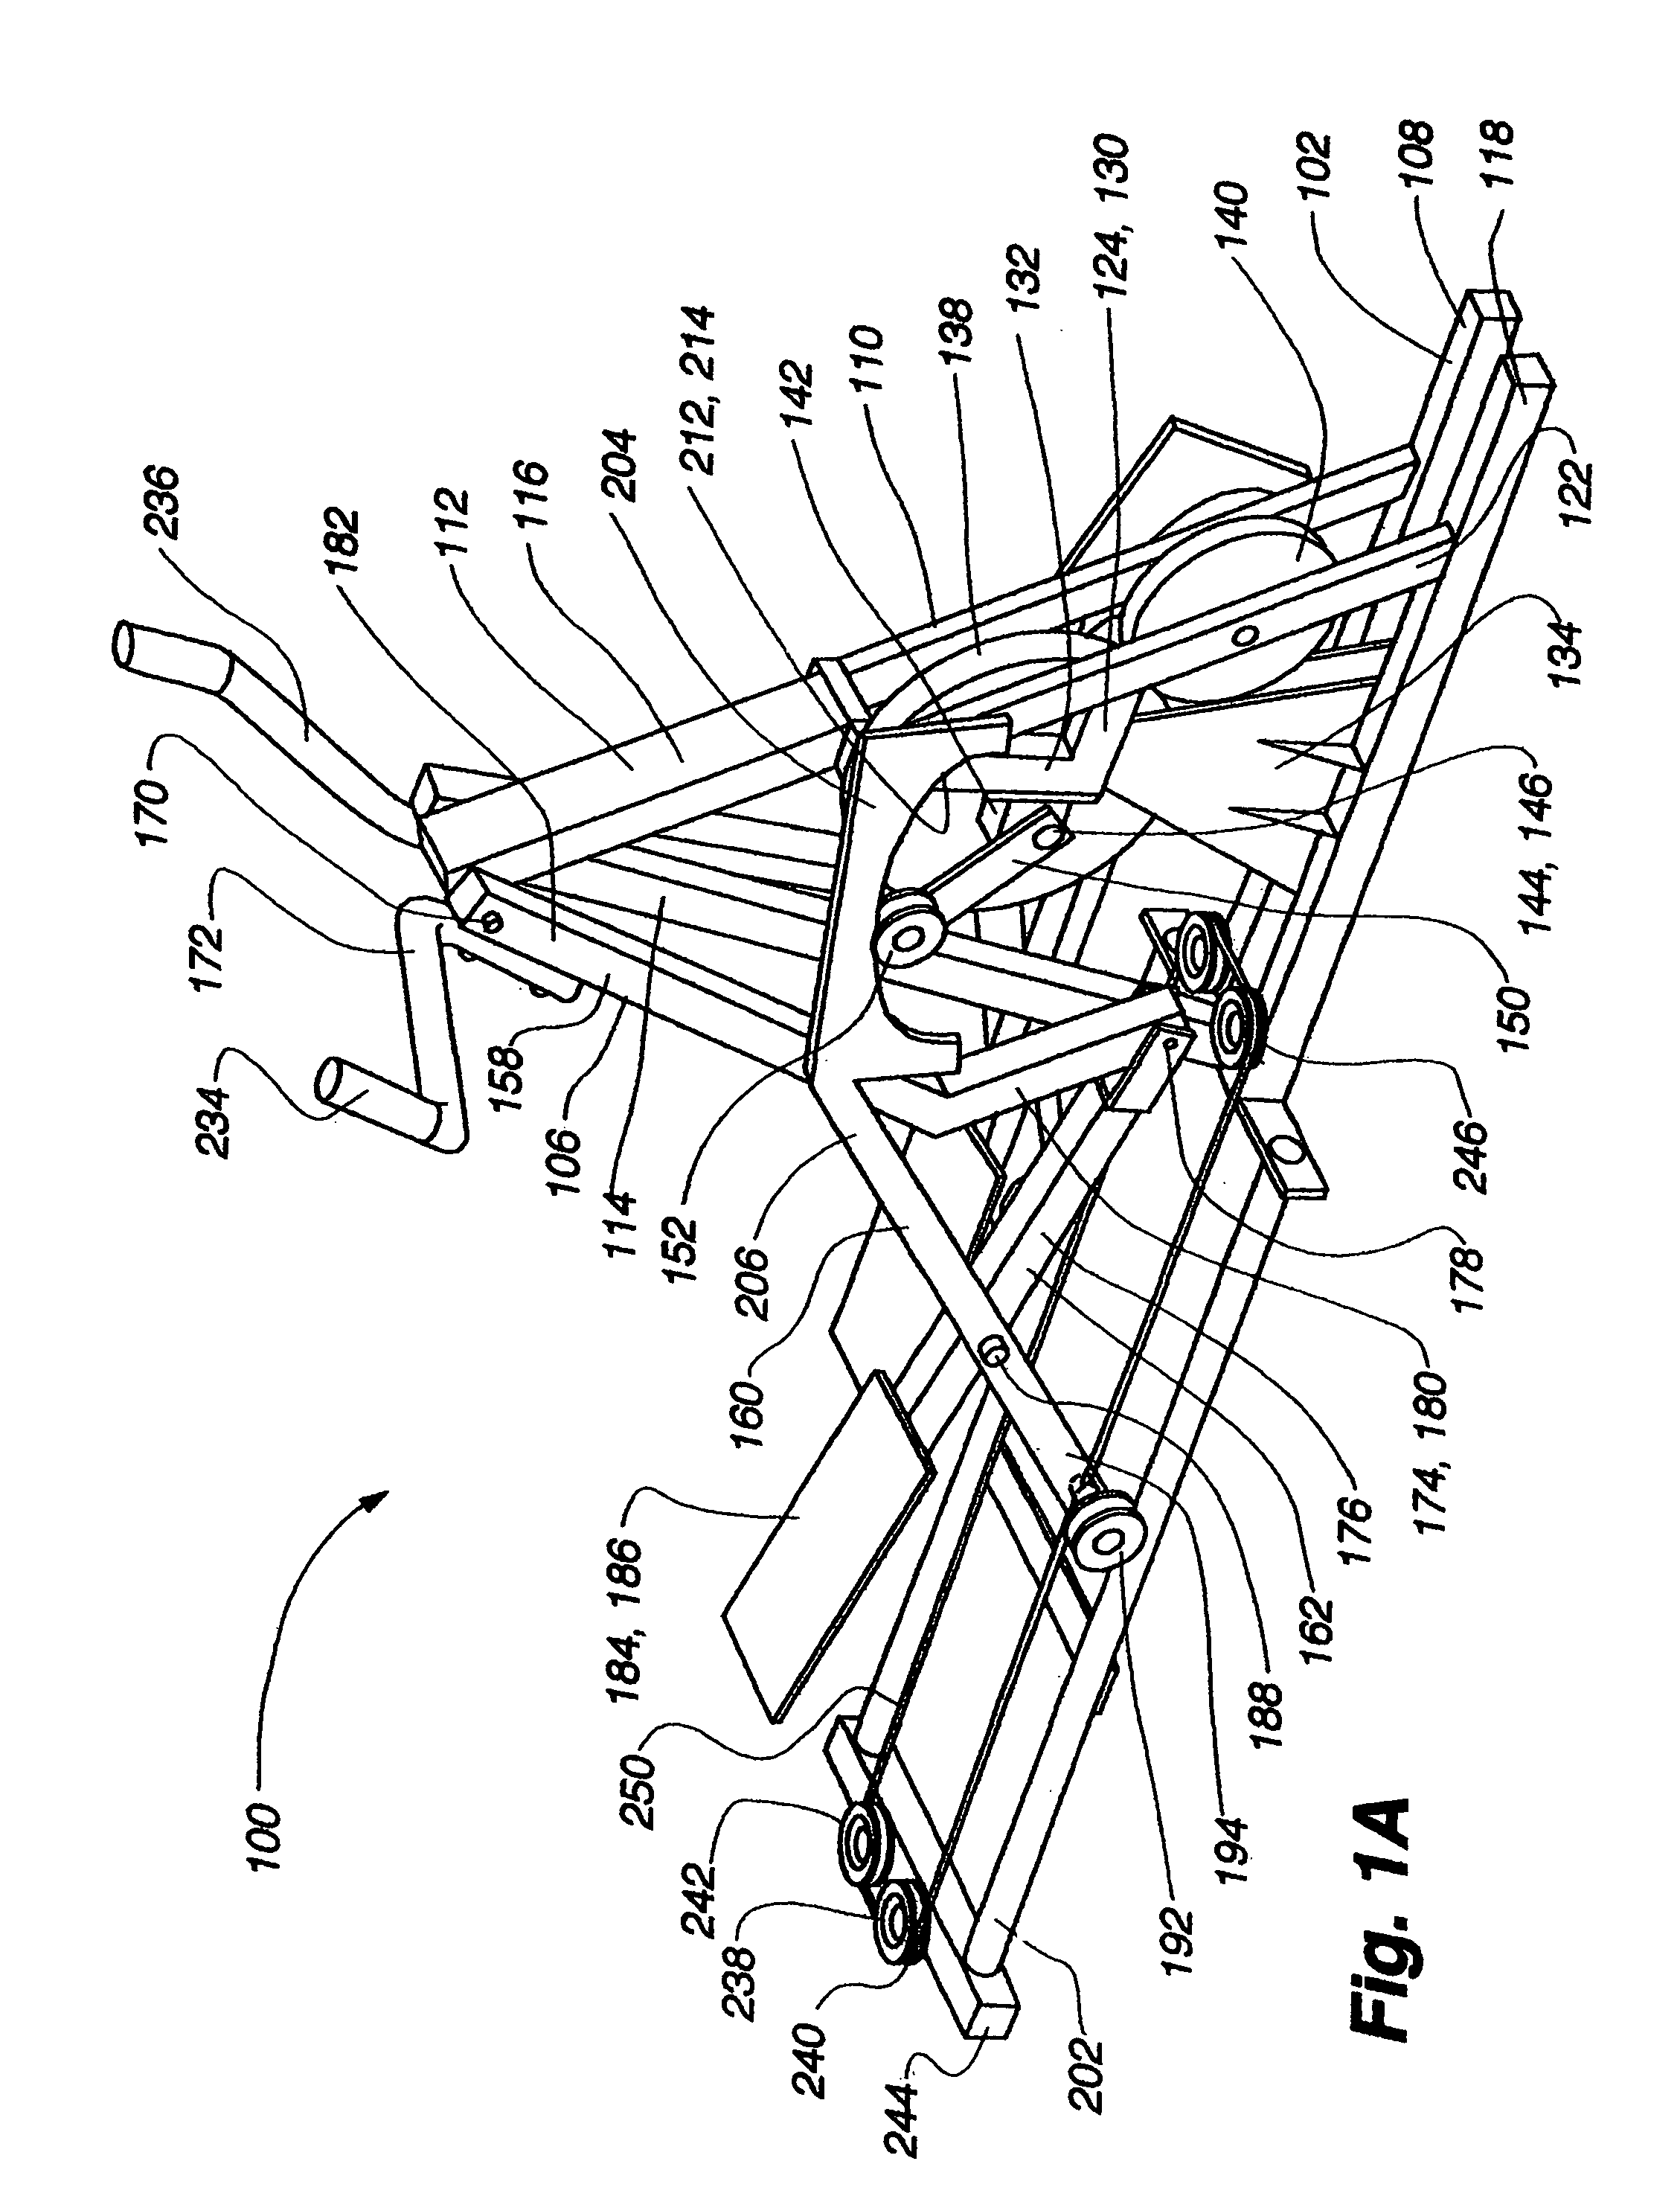 Releasable connection mechanism for variable stride exercise devices